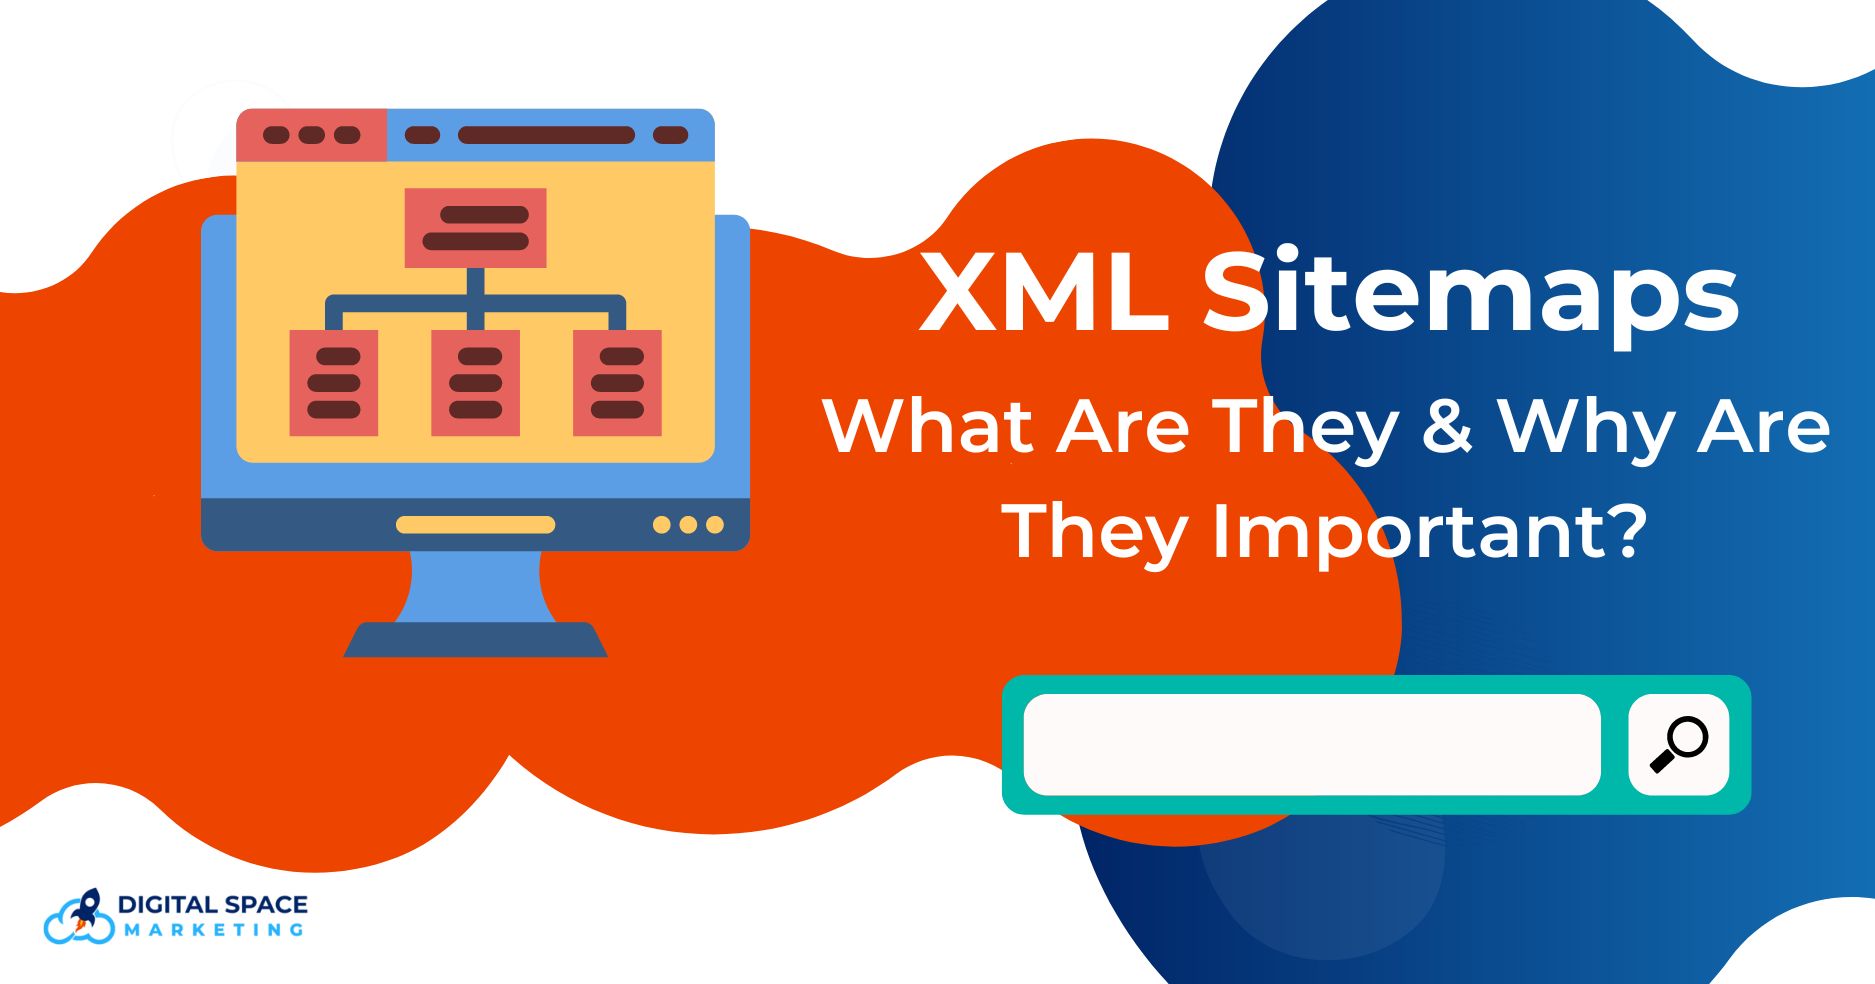 XML Sitemaps What Are They